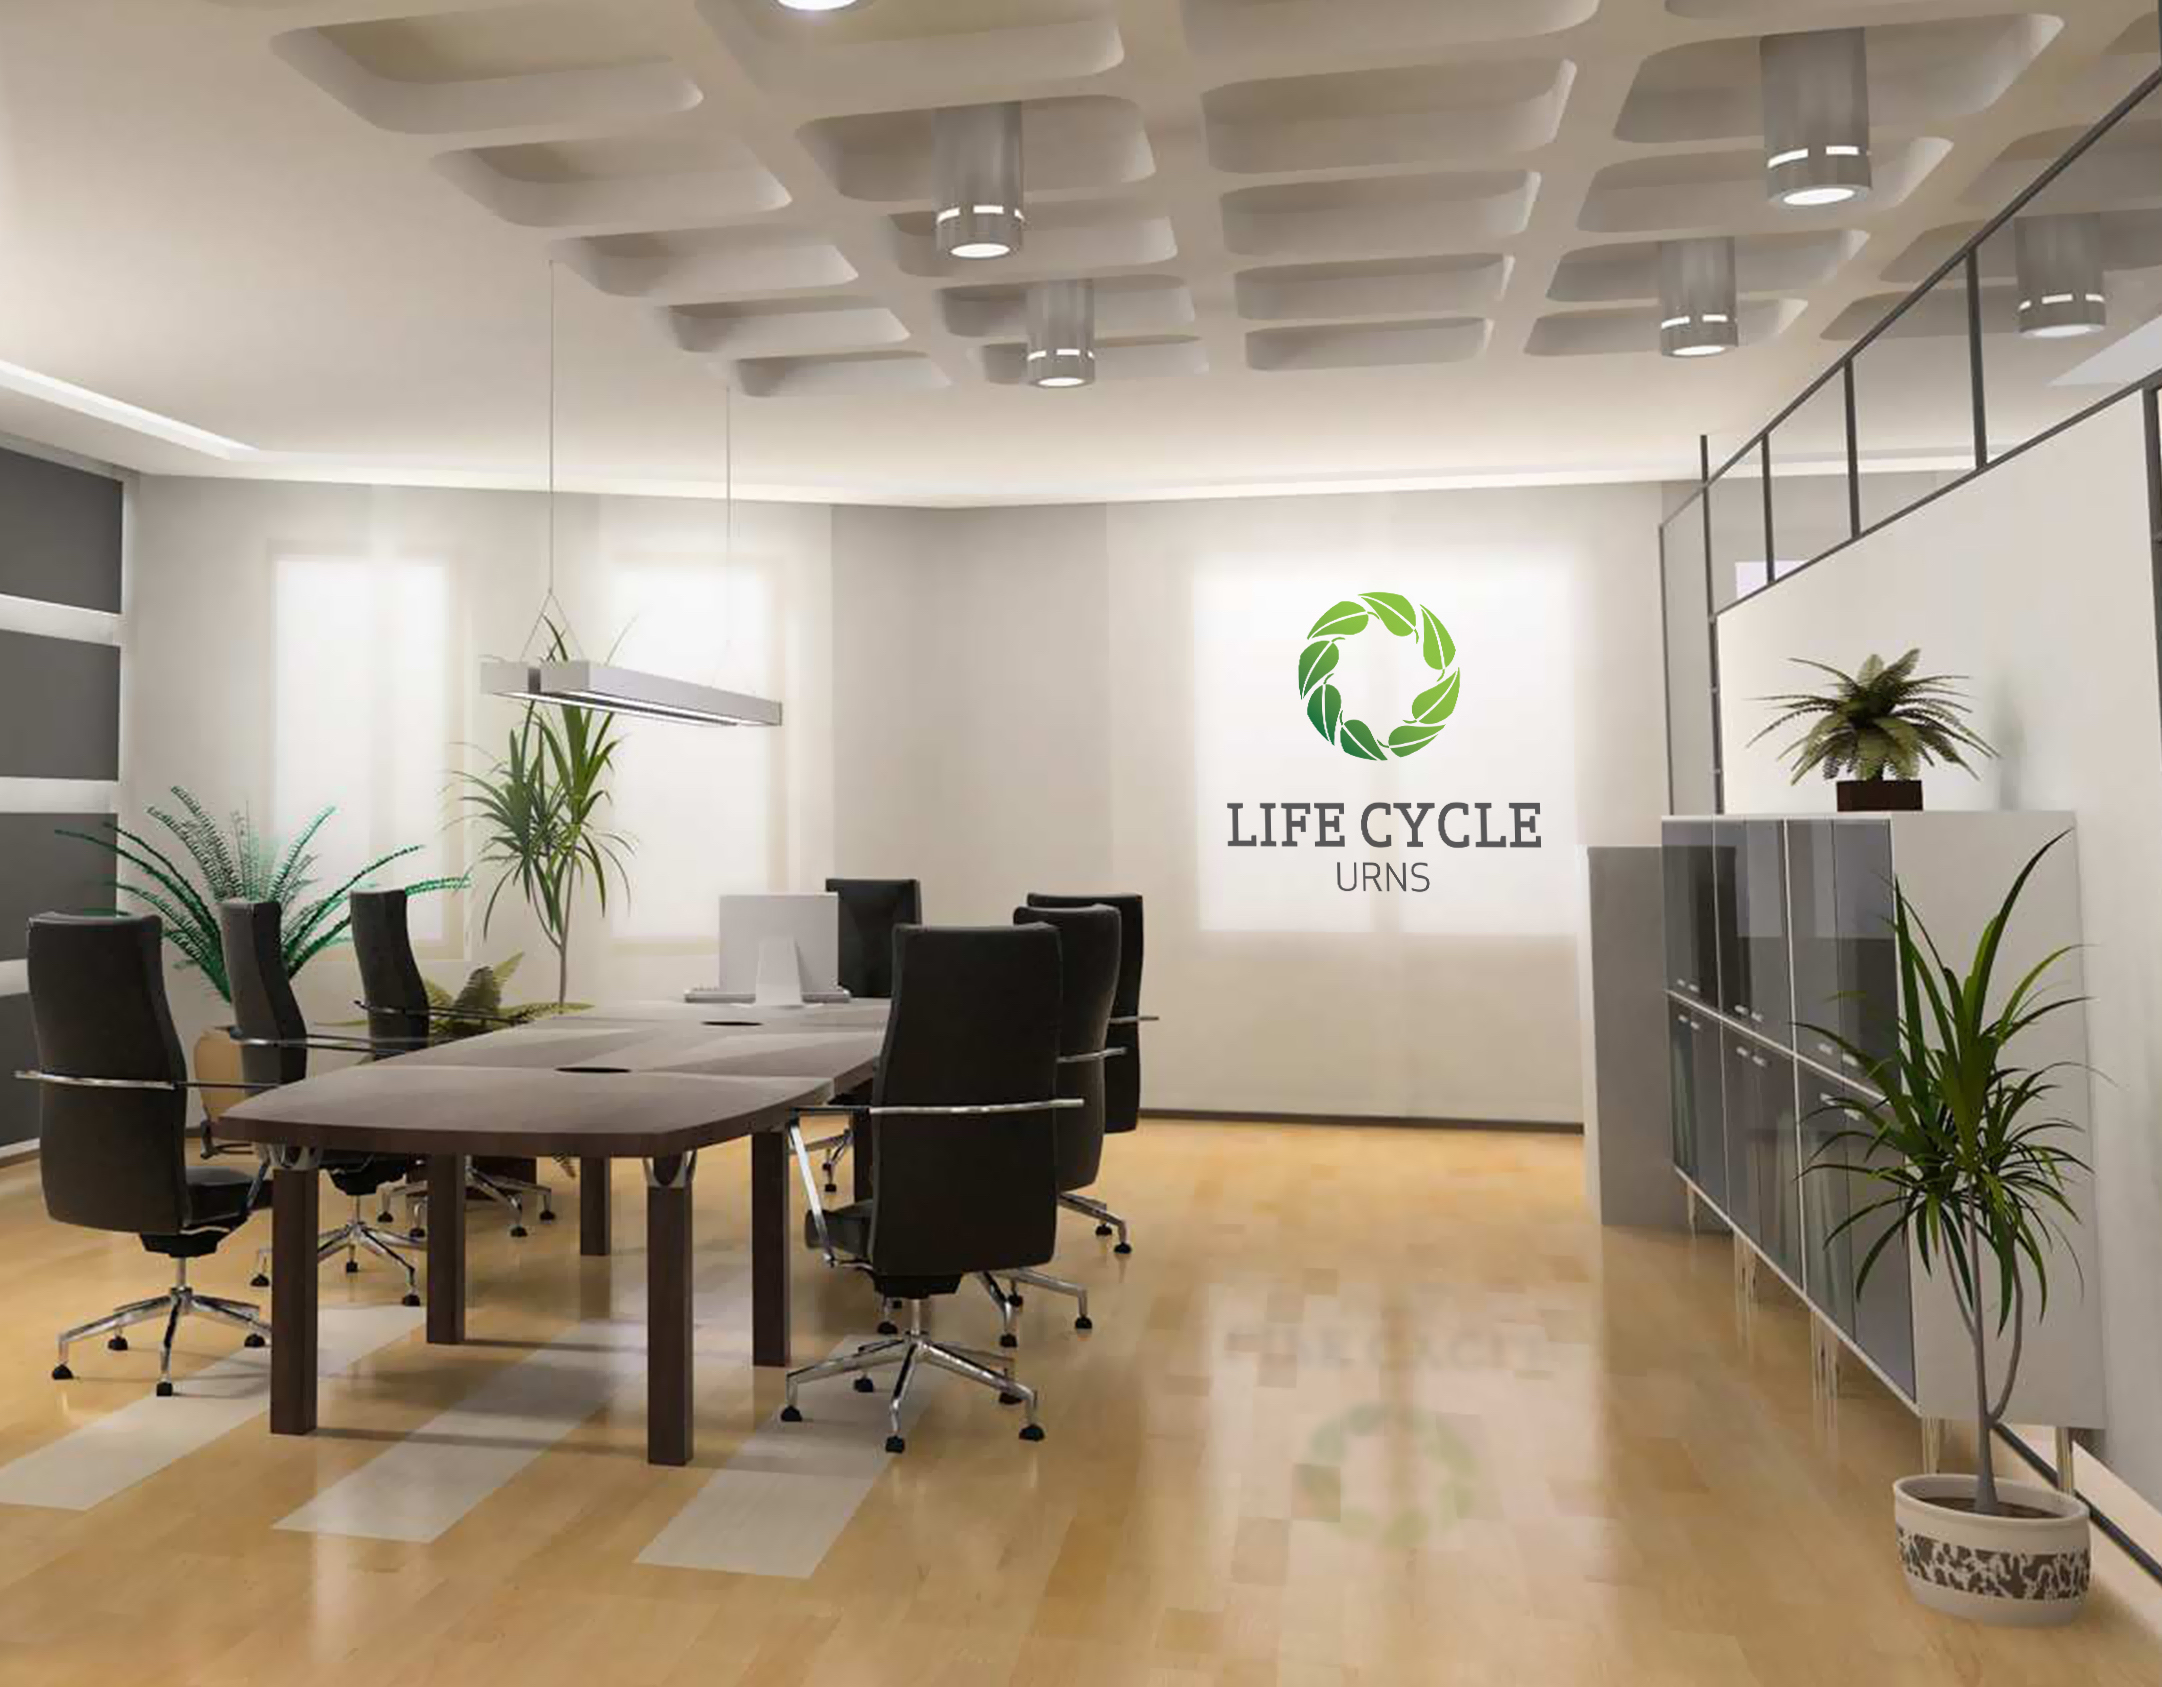 life-cycle-urns-office.jpg